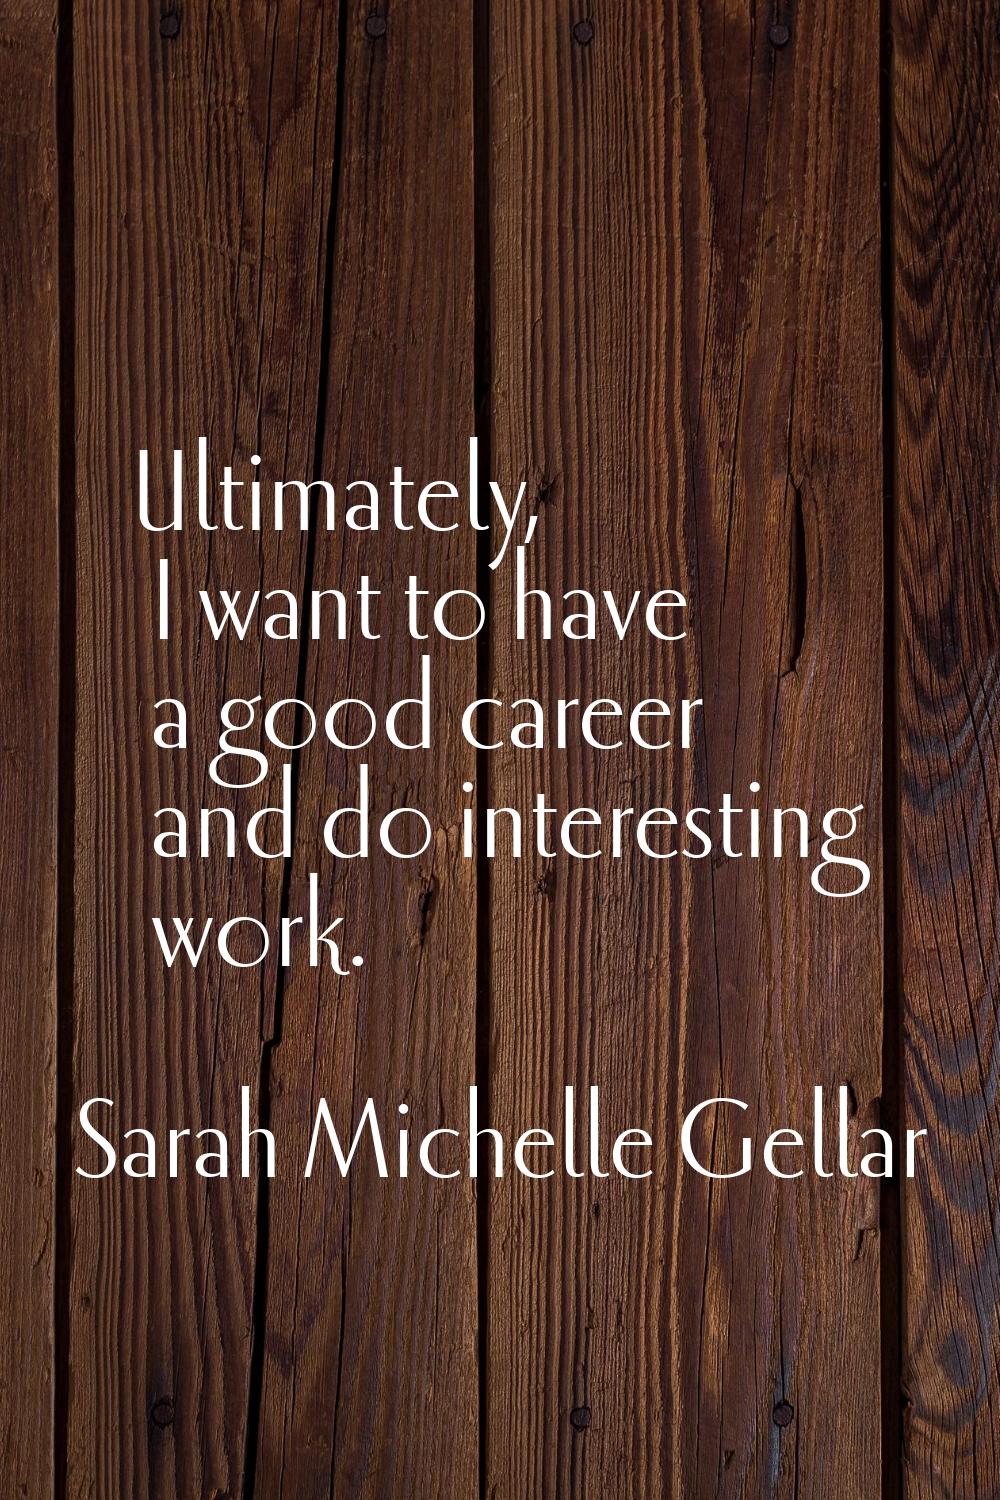 Ultimately, I want to have a good career and do interesting work.